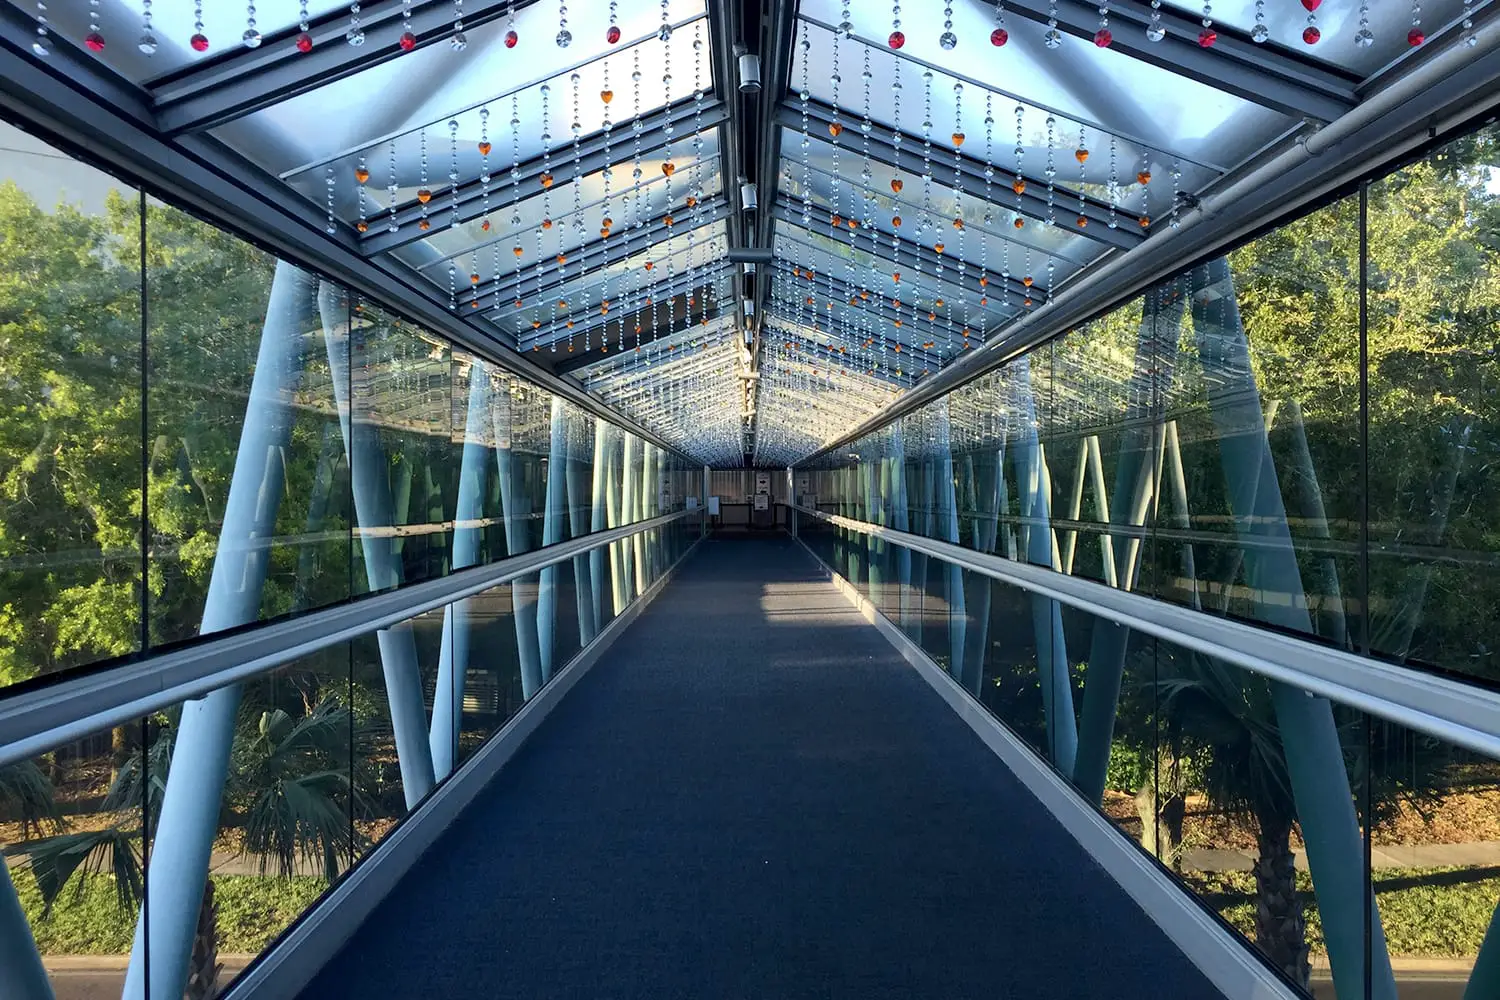 The Orlando Science Center’s glass pedestrian bridge high above Princeton Street is adorned with a rainbow of heart shaped crystals hanging inside